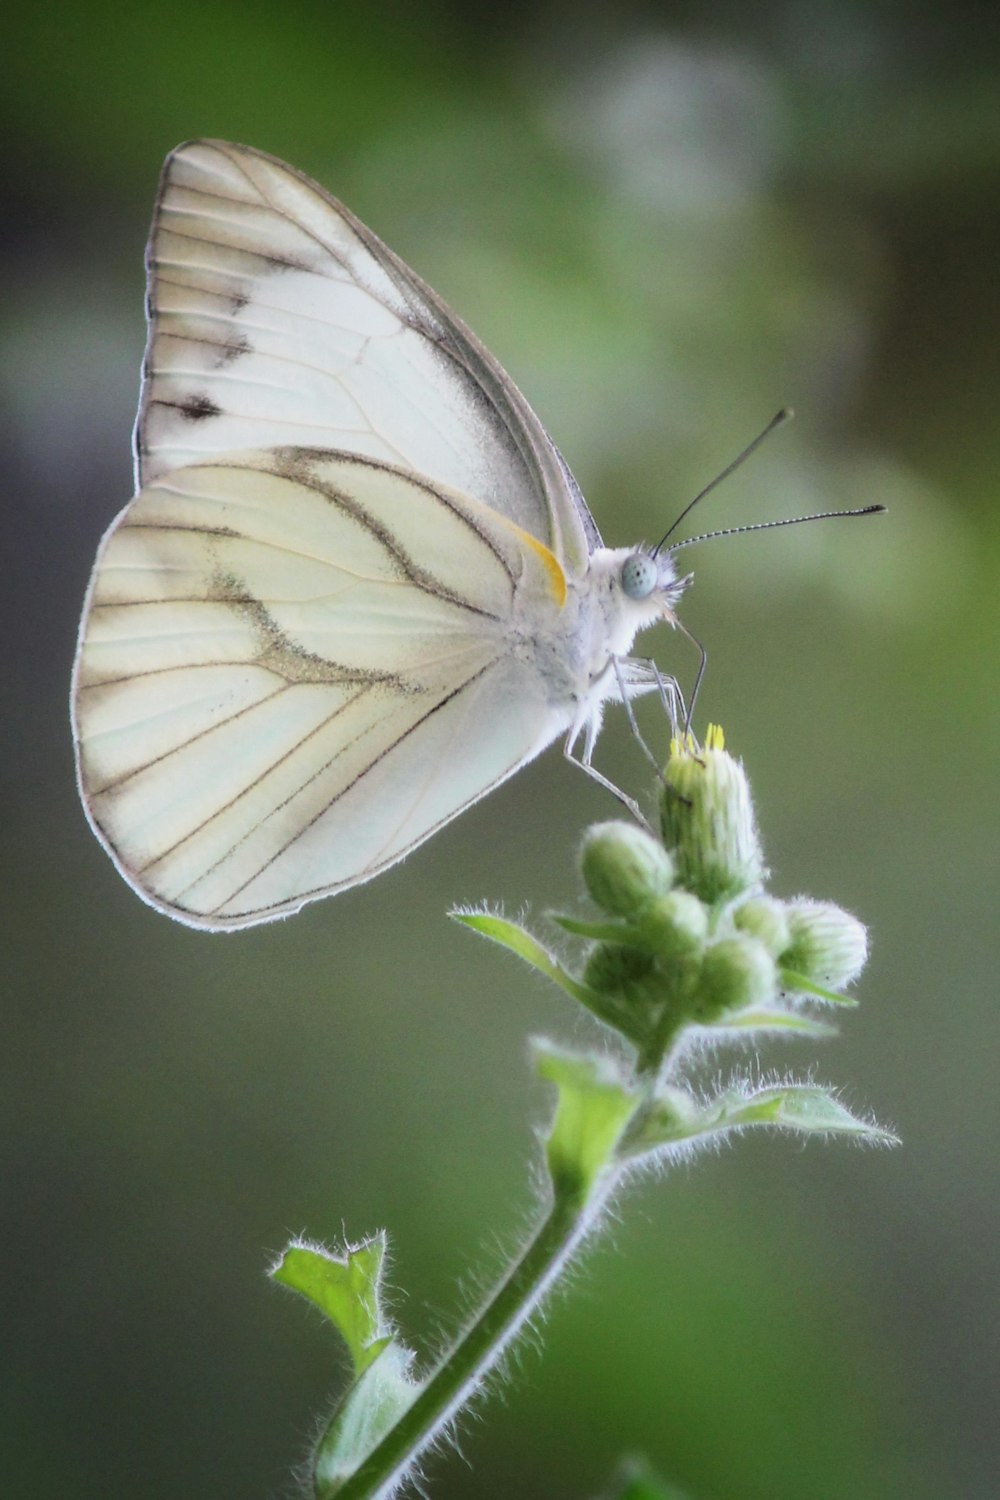 white and gray butterfly perched on green plant